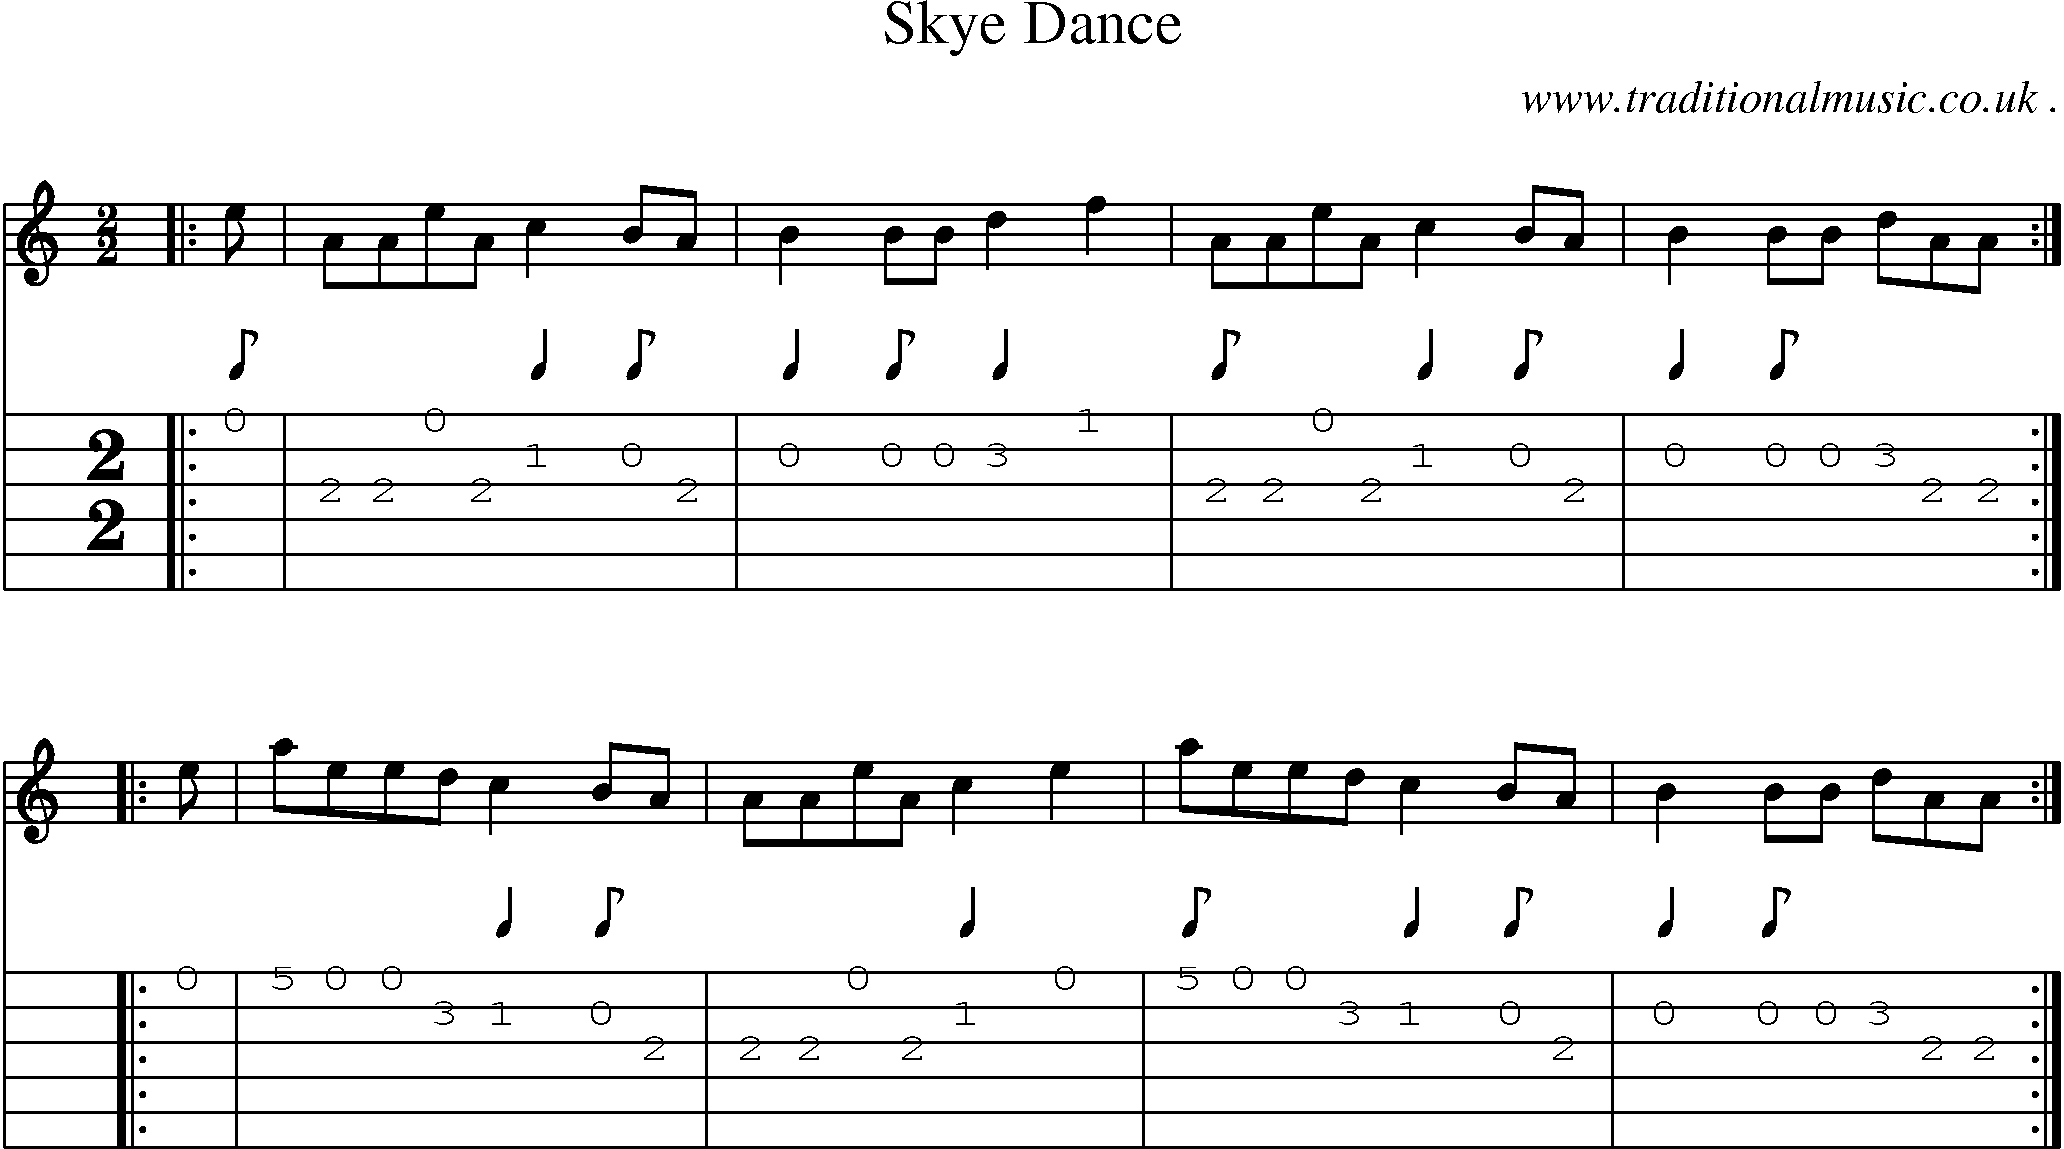 Sheet-music  score, Chords and Guitar Tabs for Skye Dance